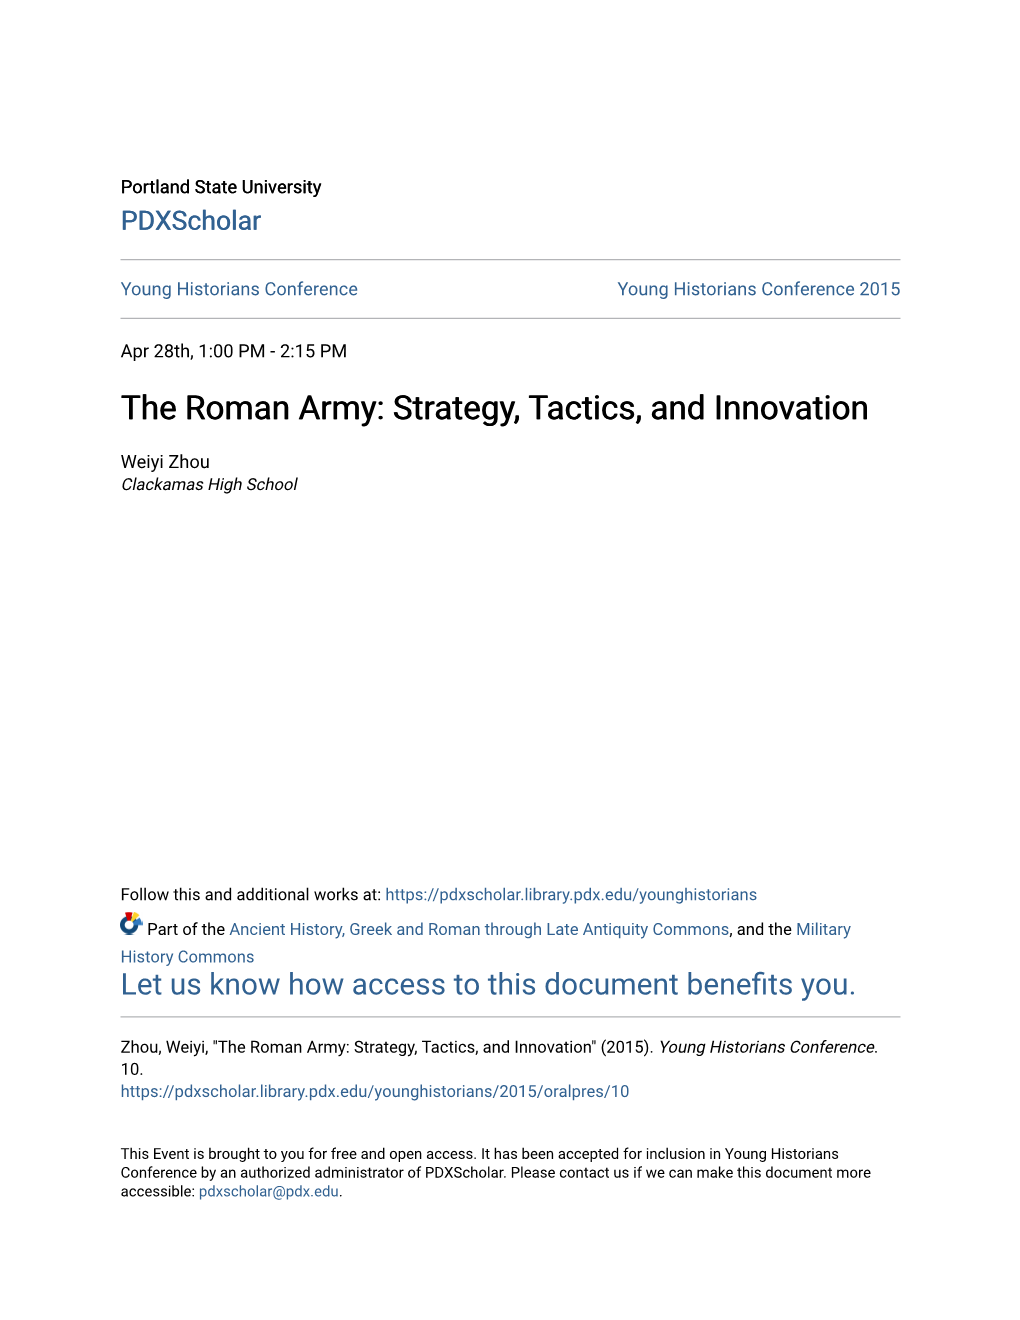 The Roman Army: Strategy, Tactics, and Innovation